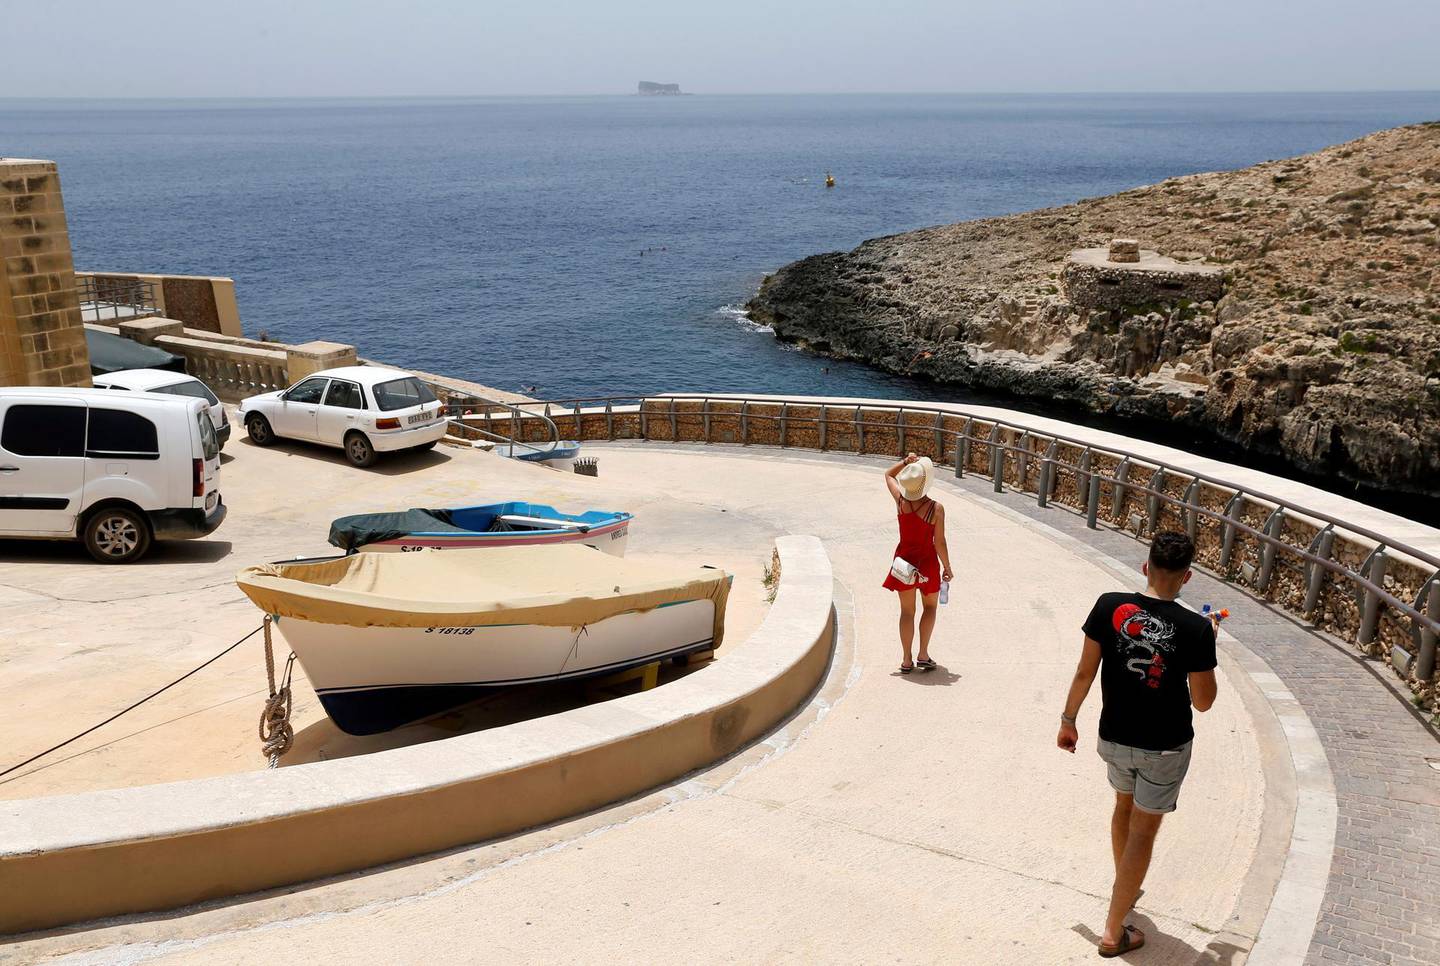 Tourists walk down to the sea in Zurrieq Valley, outside Zurrieq, Malta June 24, 2021. Malta may be one of the countries added to a 'green' list where UK travellers will be able to visit without needing to quarantine after returning from holiday.  REUTERS/Darrin Zammit Lupi